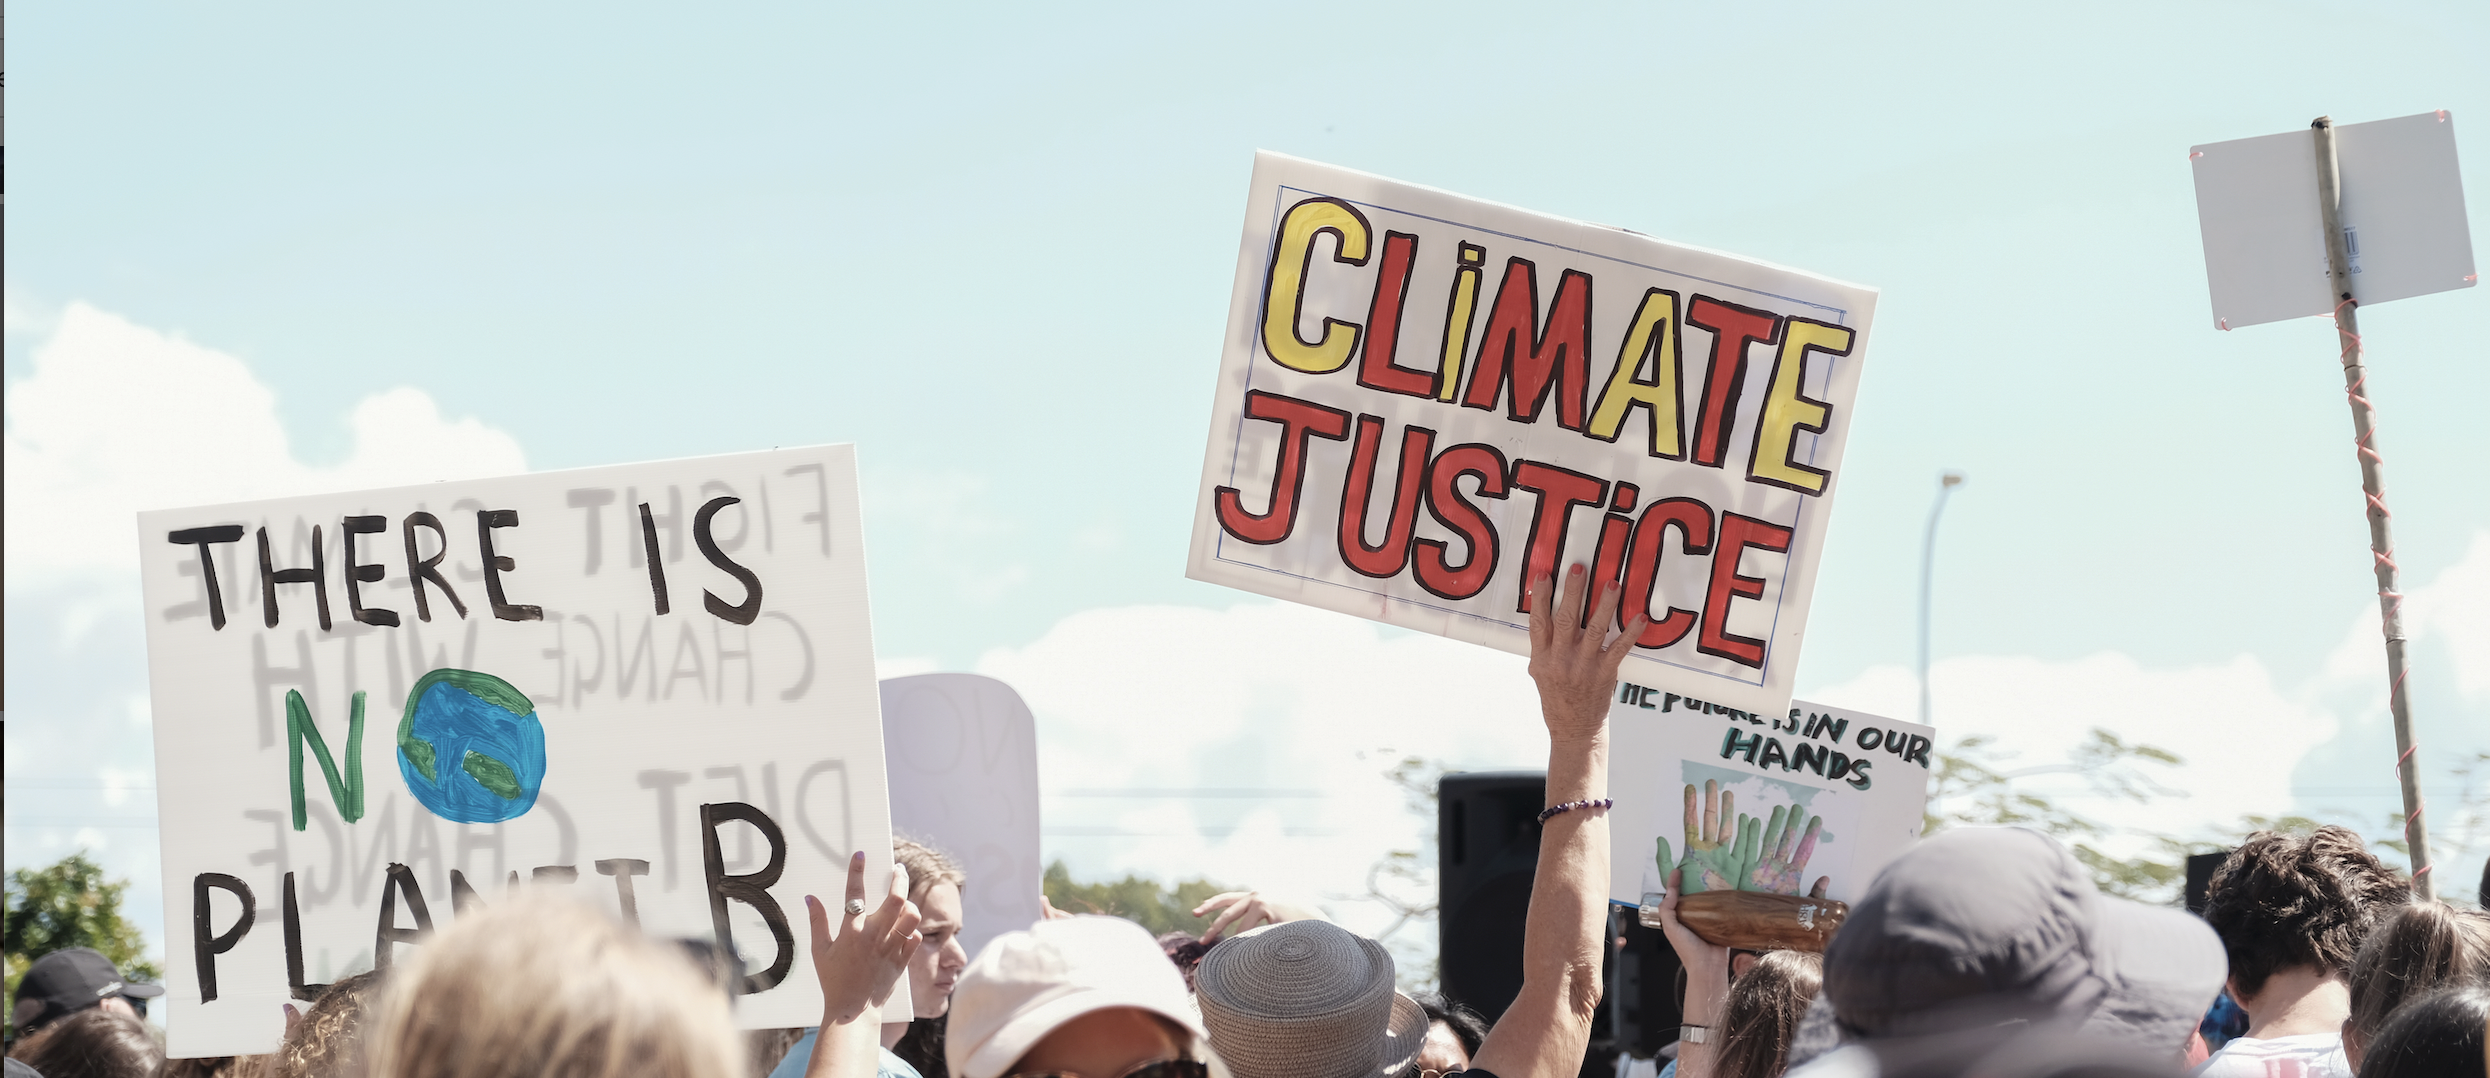 Image of a protest sign "Climate Justice"